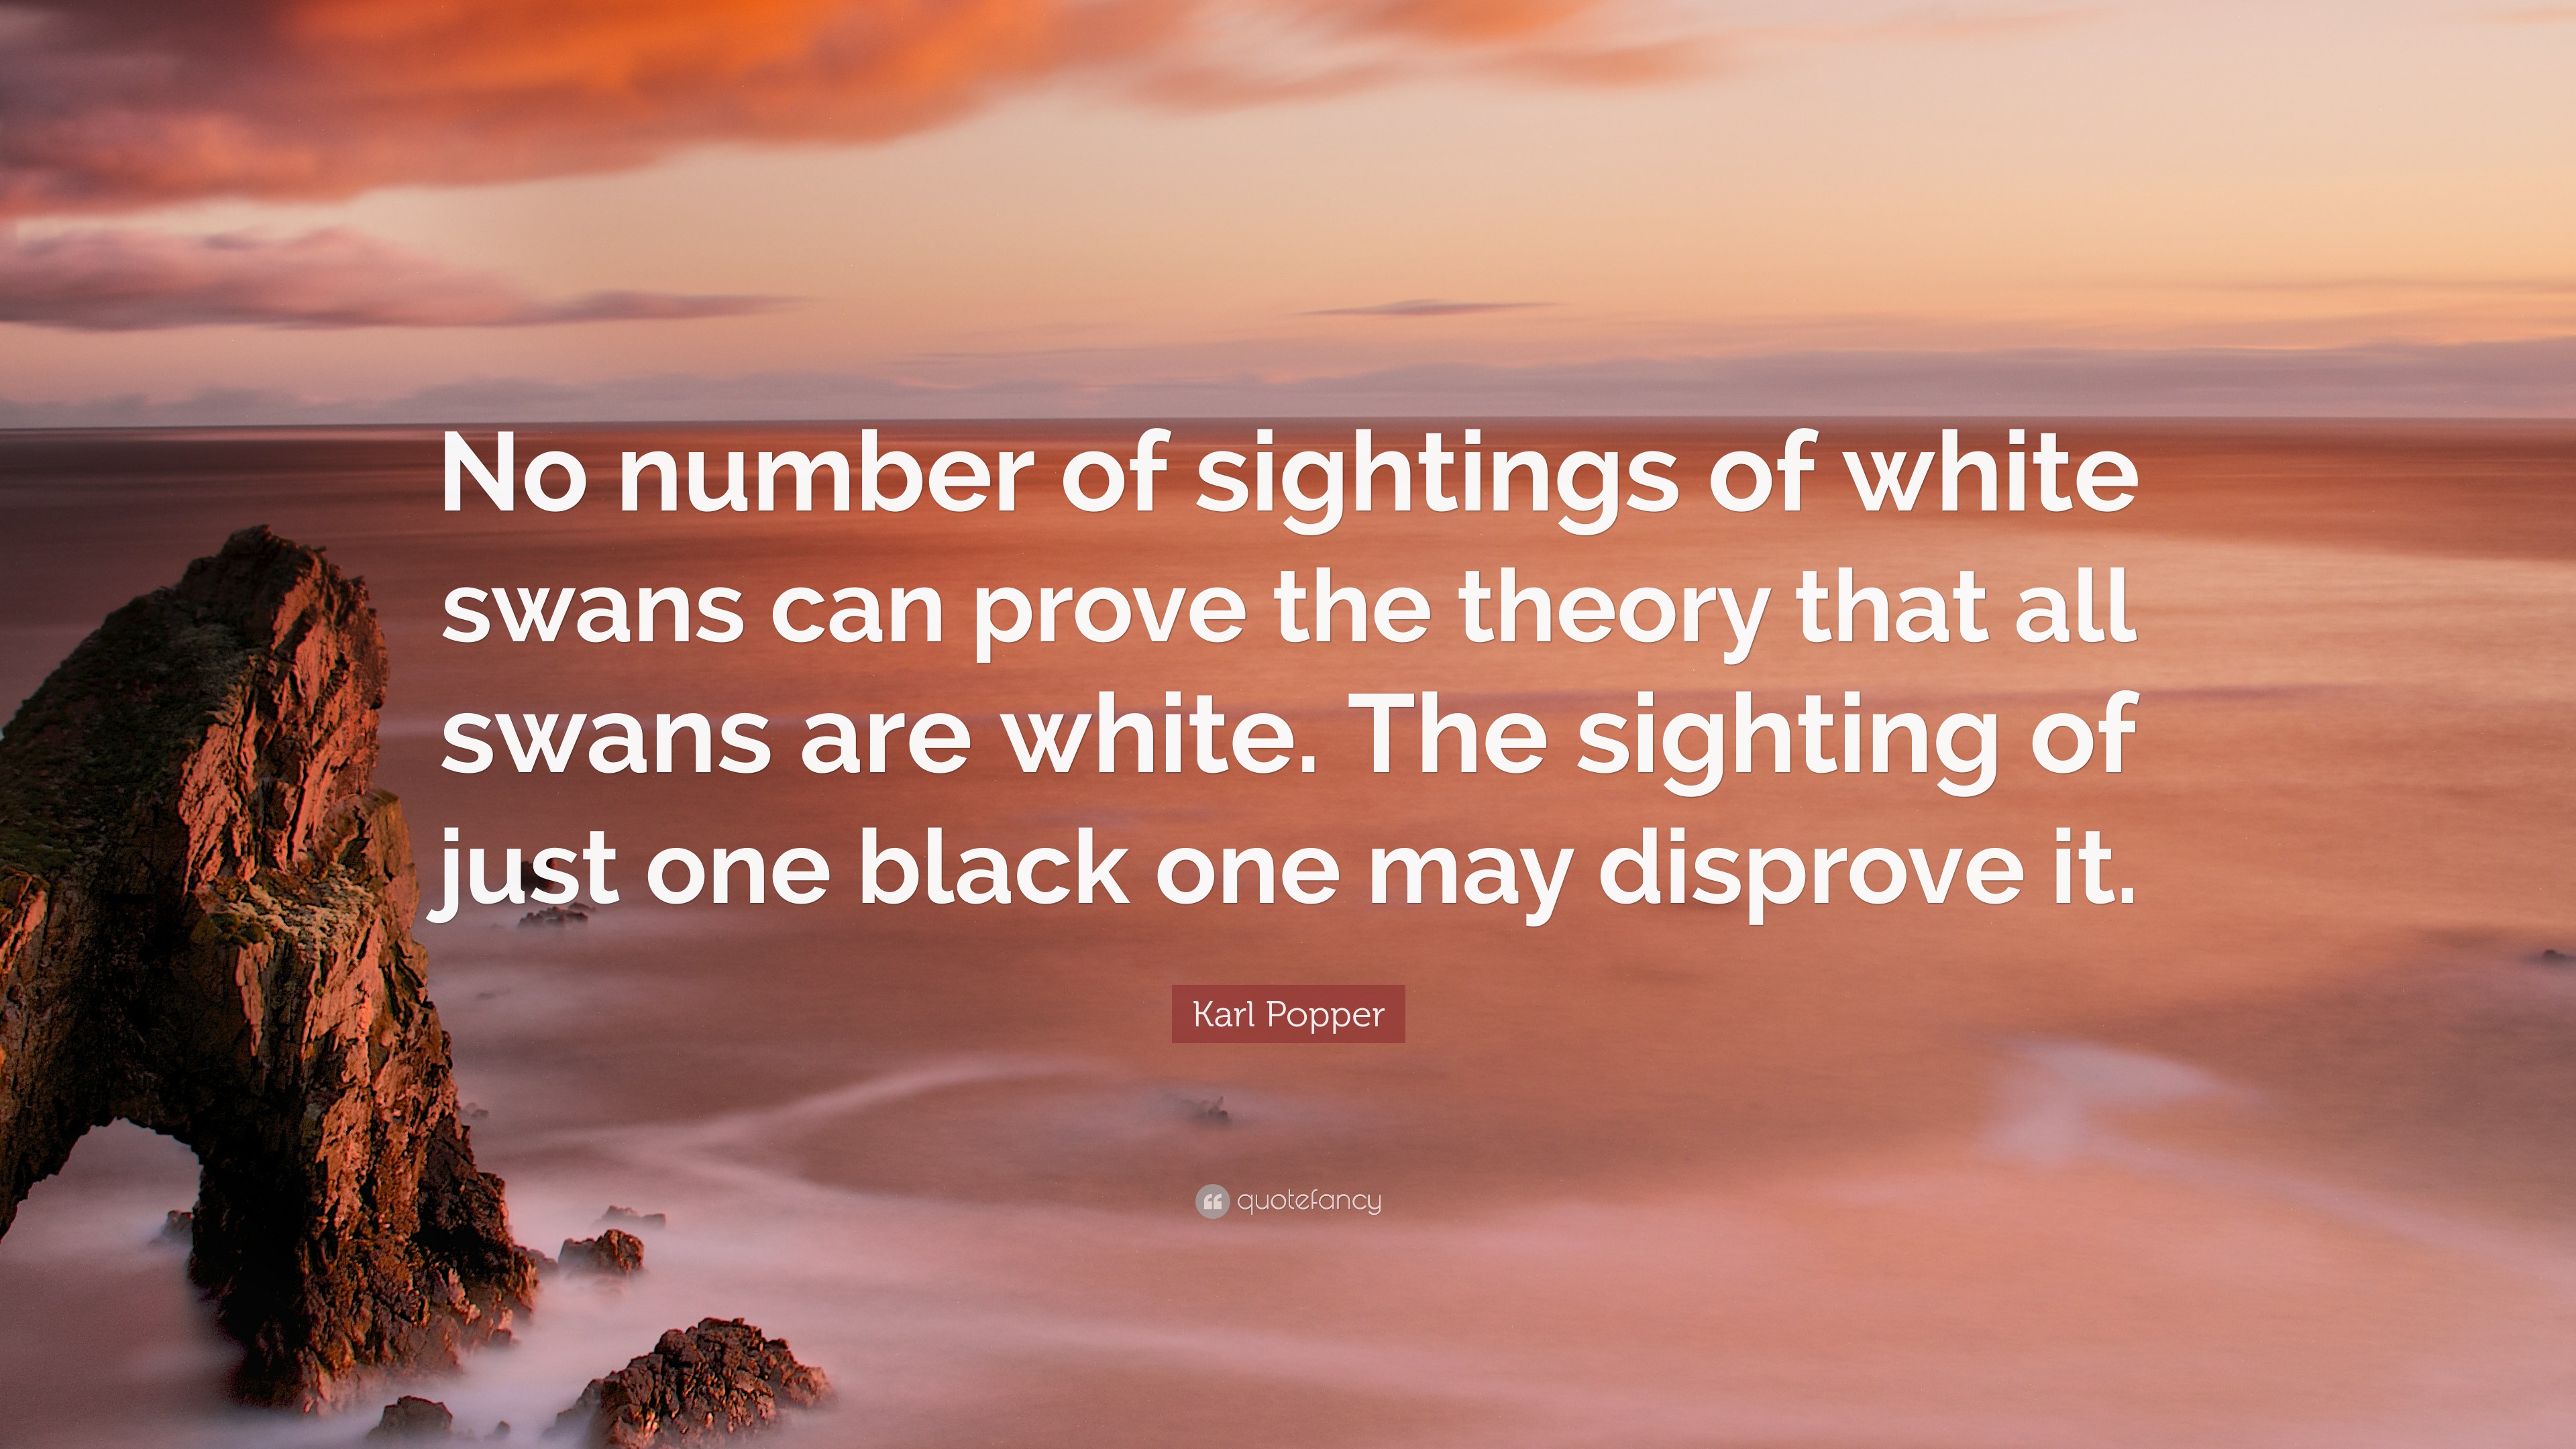 Karl Popper Quote: “No number of sightings of white swans can prove the theory that all are white. The sighting of just one one ...”